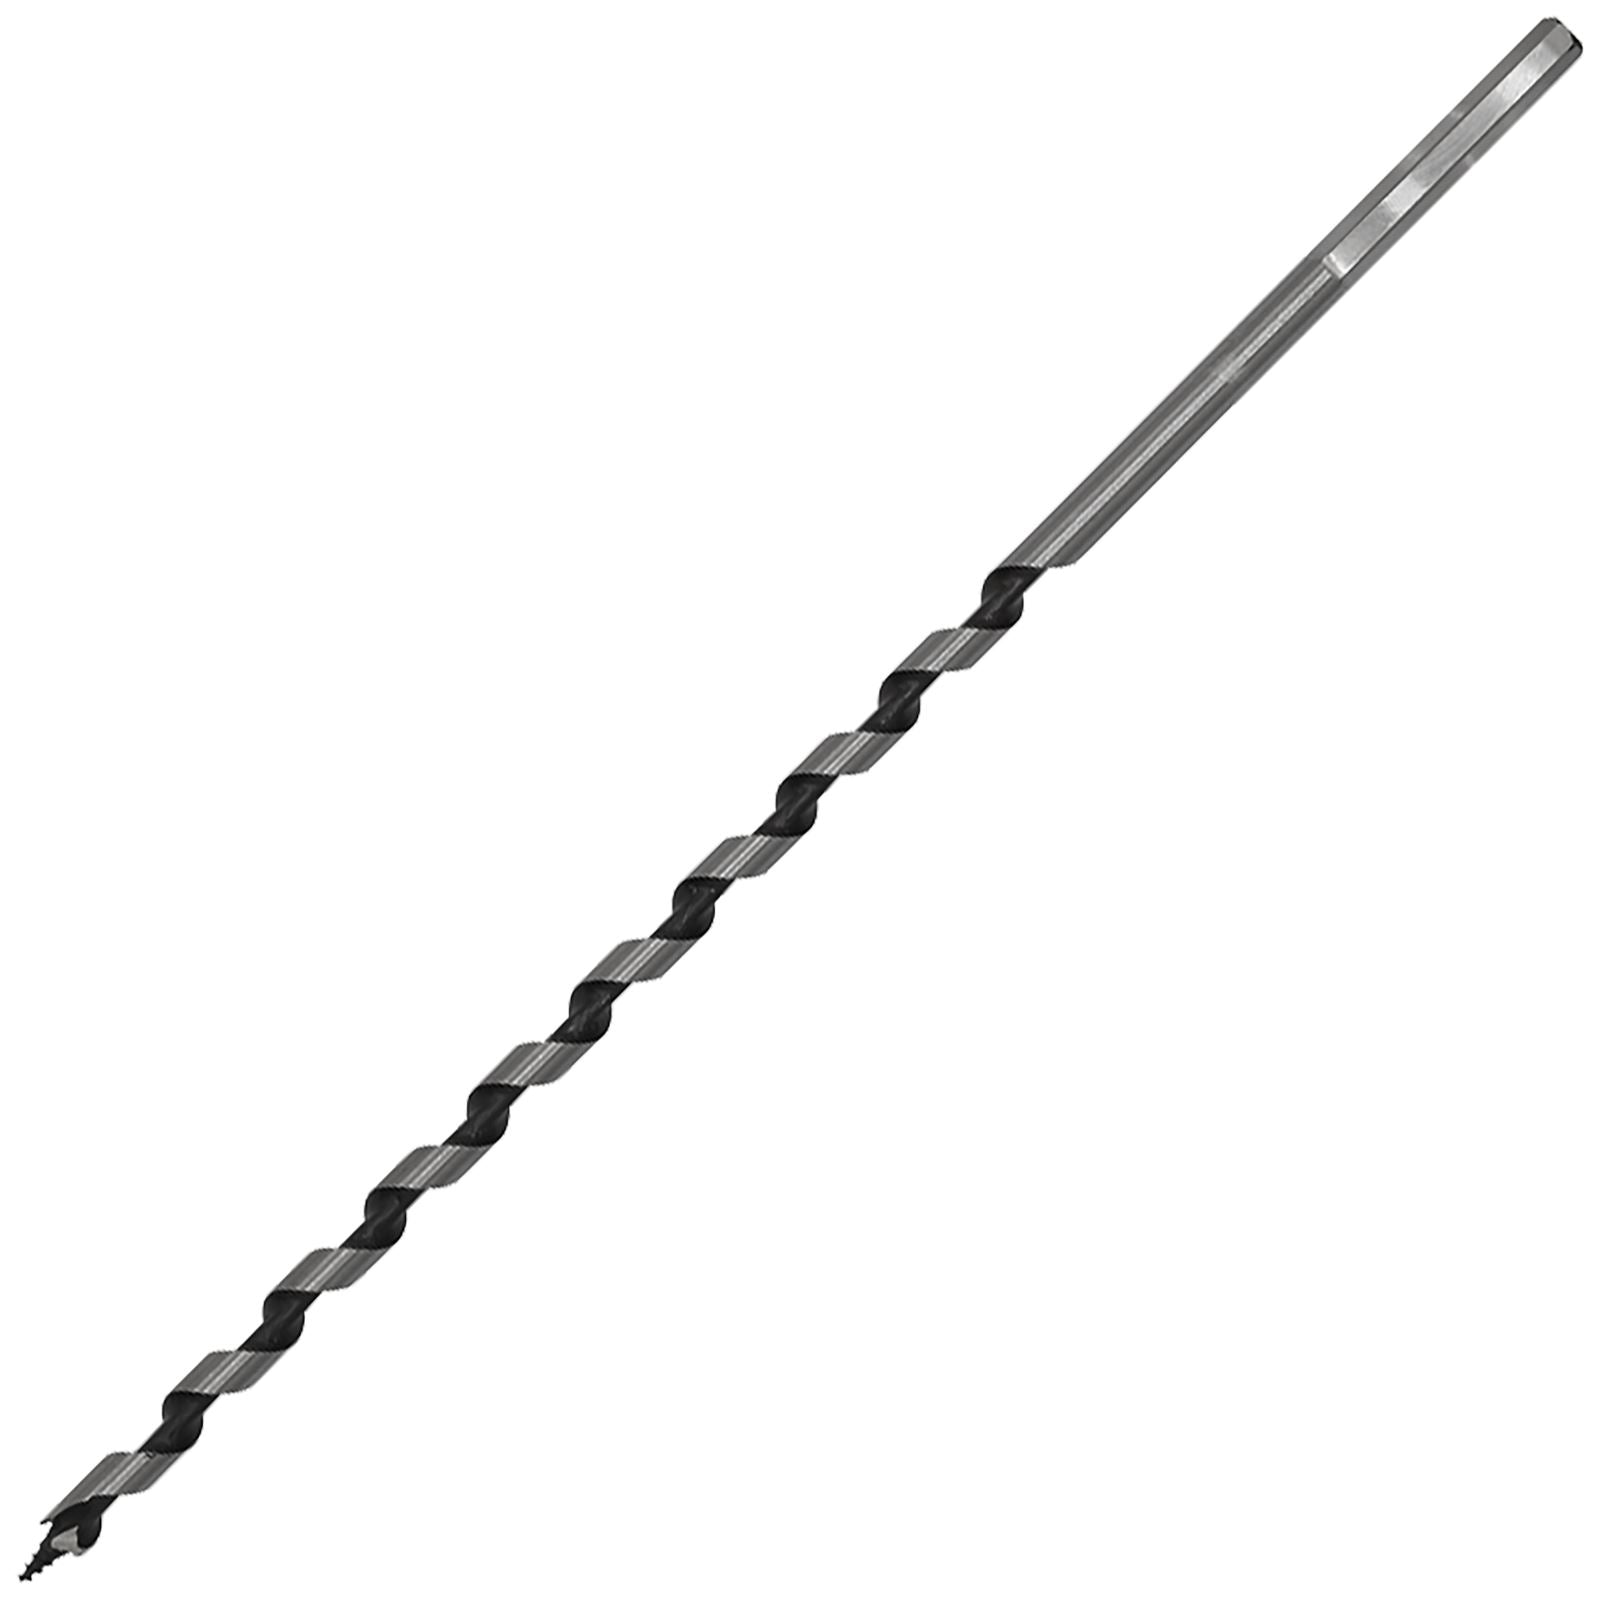 Worksafe by Sealey Auger Wood Drill Bit 6mm x 235mm